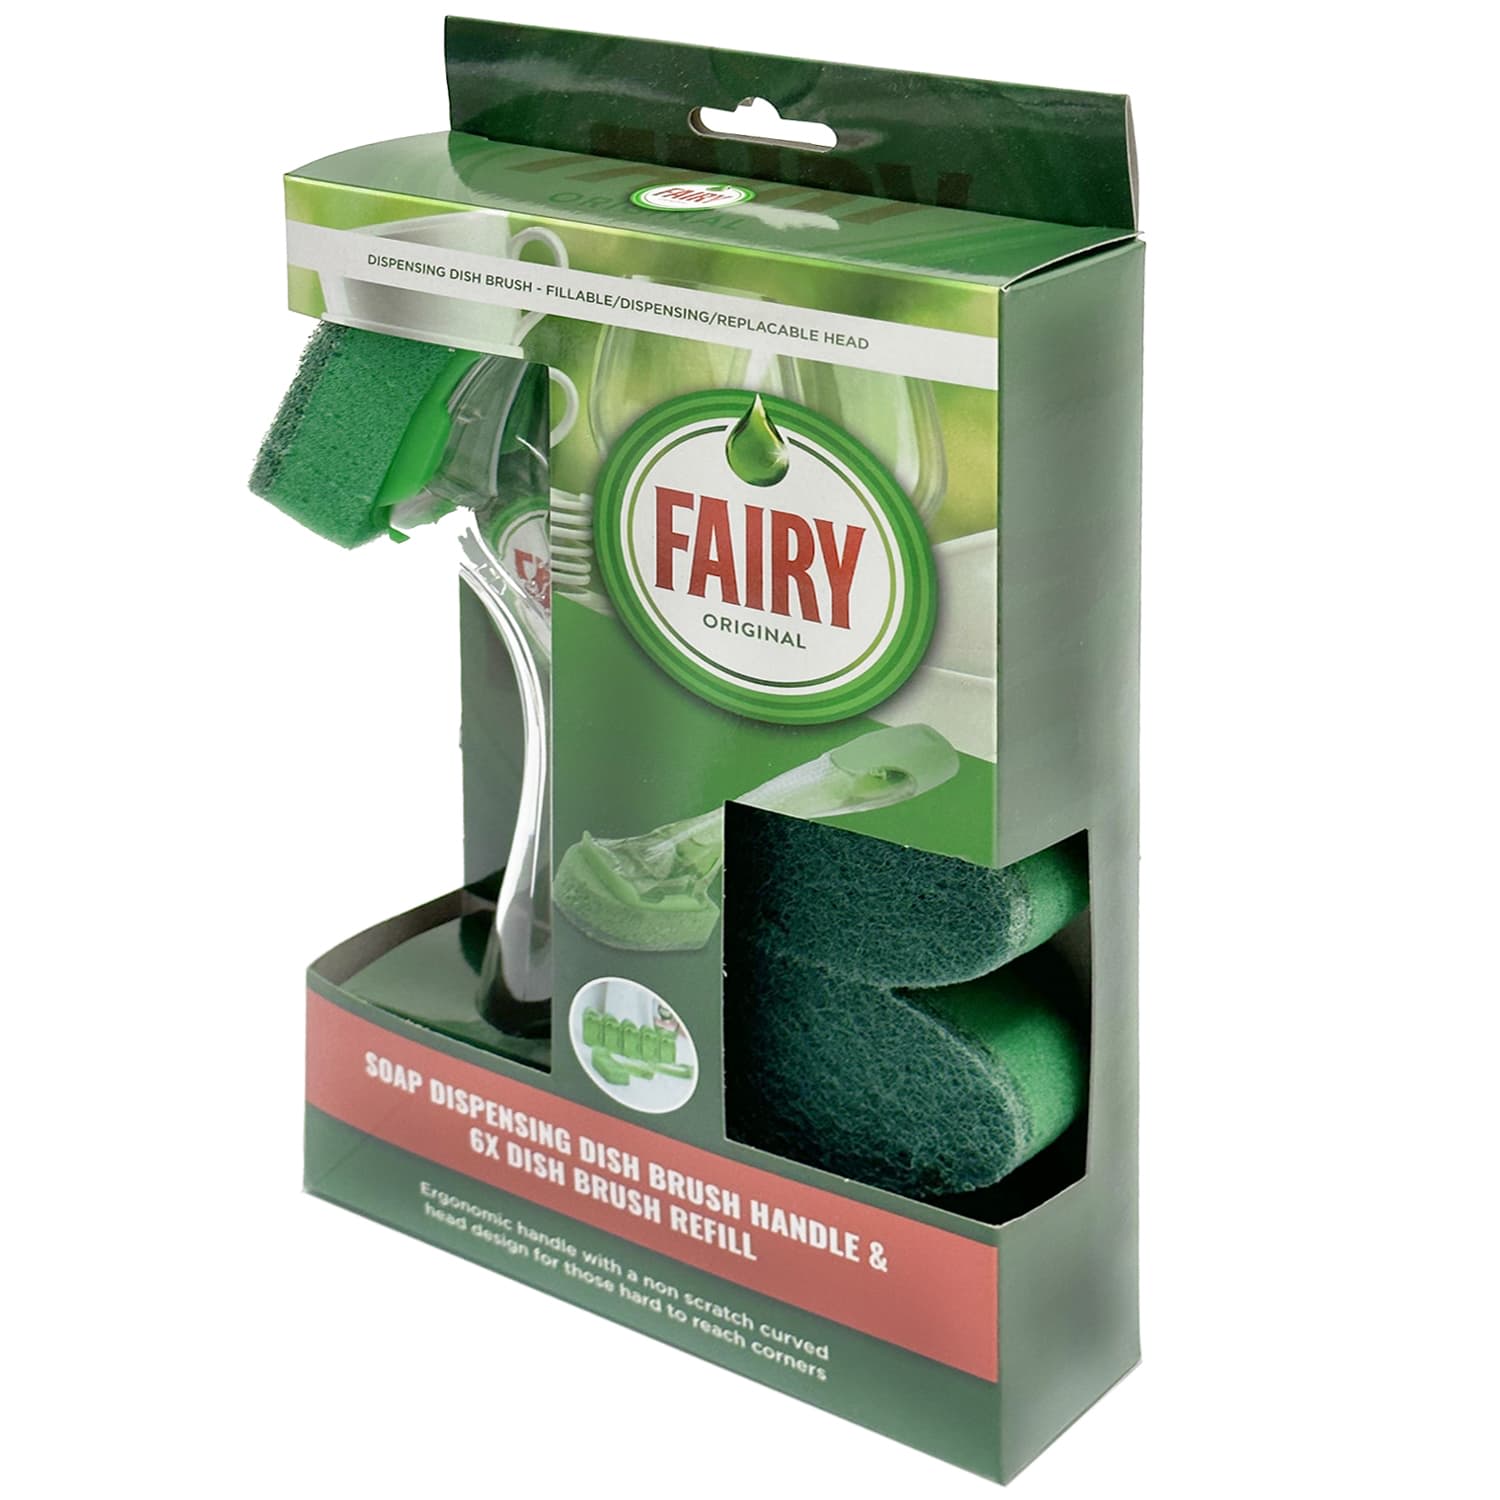 https://www.bmstores.co.uk/images/hpcProductImage/imgSource/397562-fairy-soap-dispensing-dish-brush-handle-and-6-refills.jpg